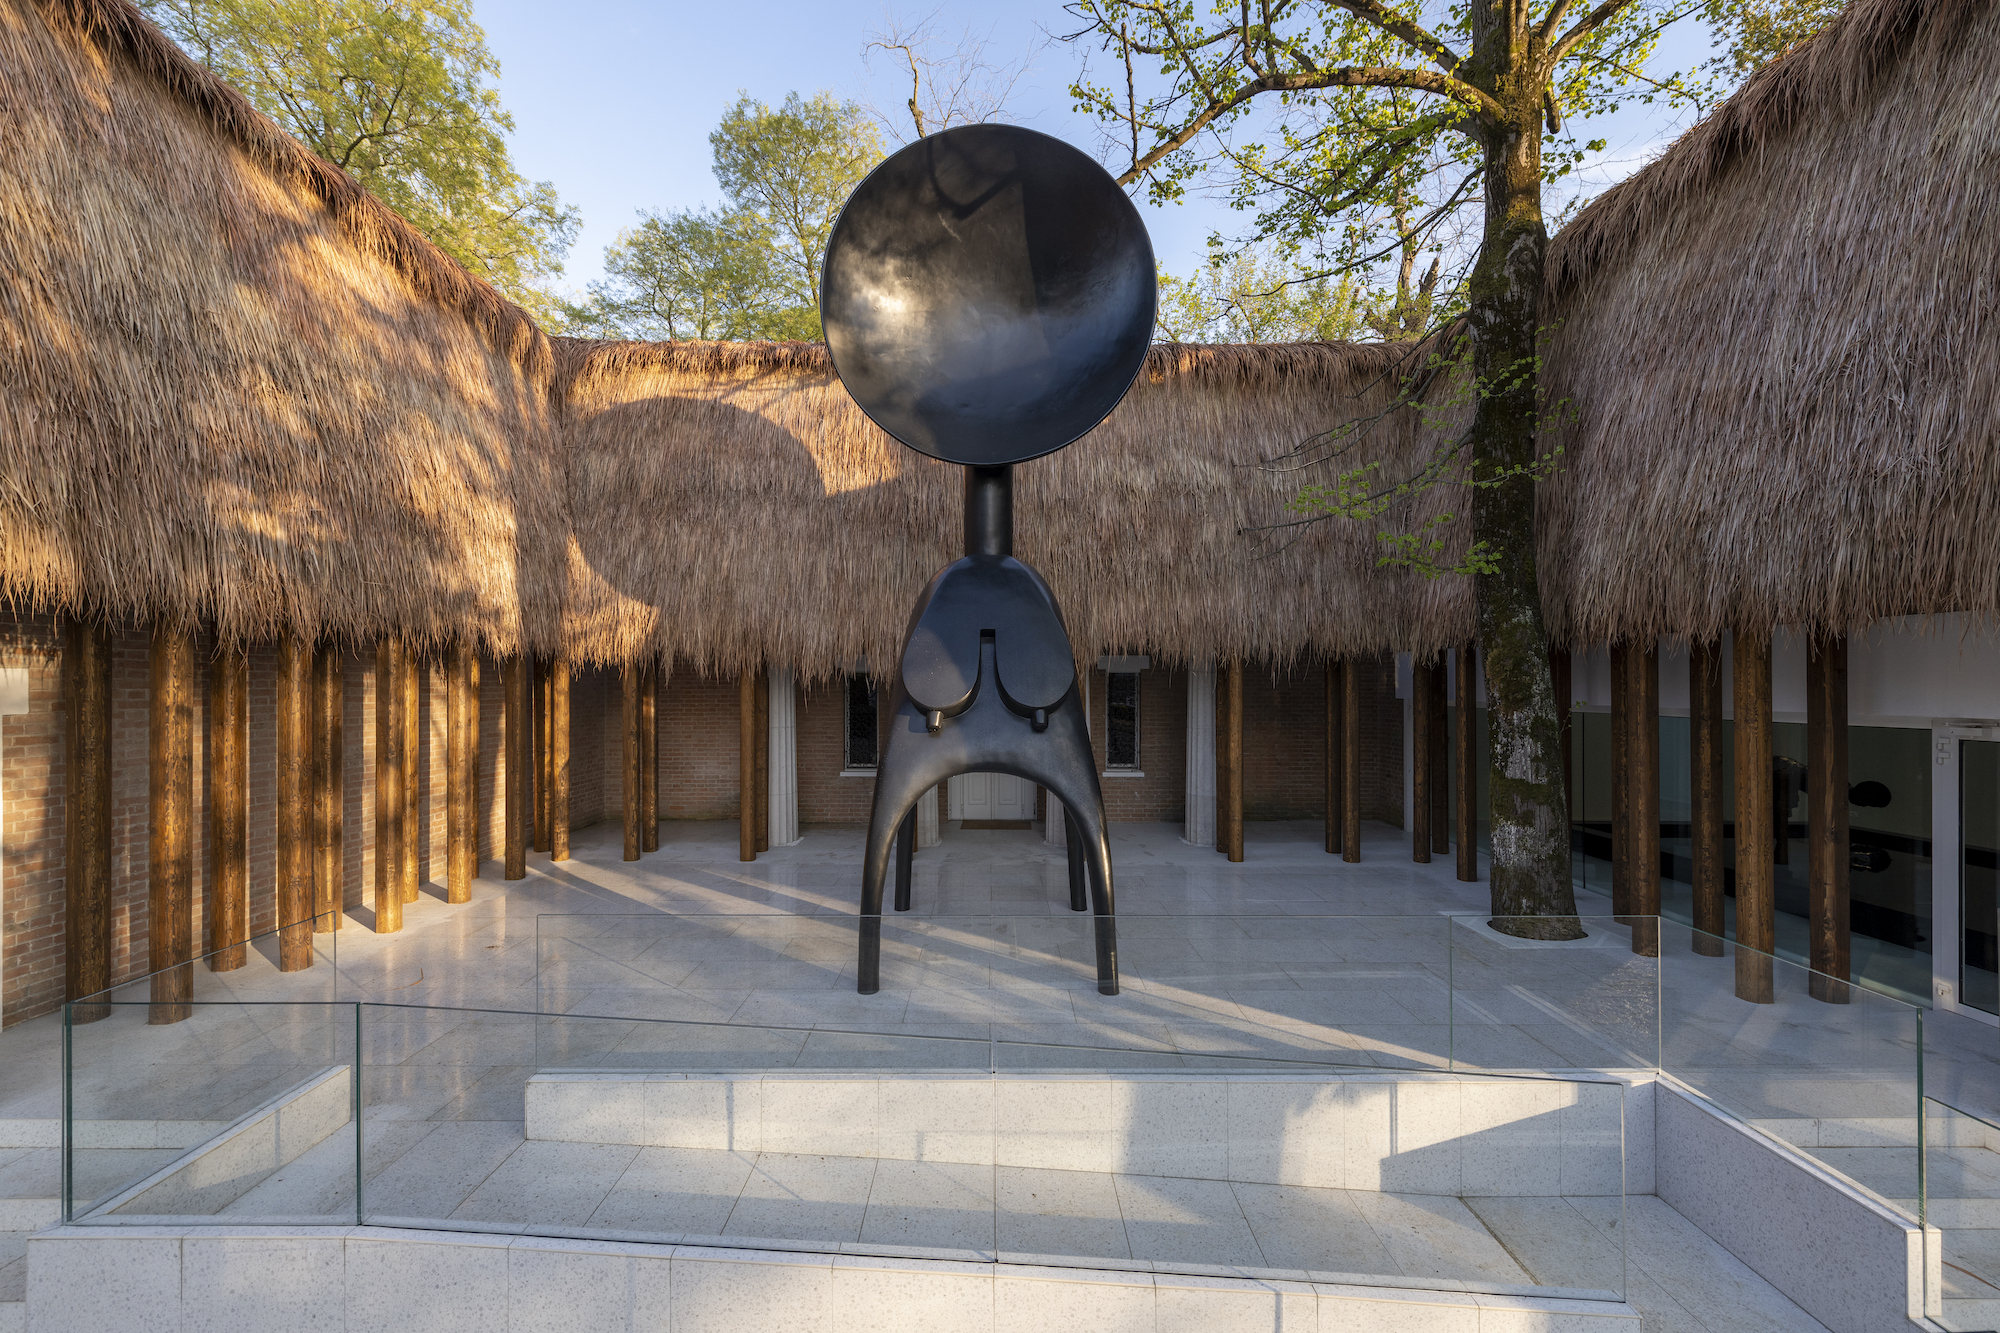 A large black bronze sculpture of an abstracted anthropomorphic figure stands amidst a courtyard.